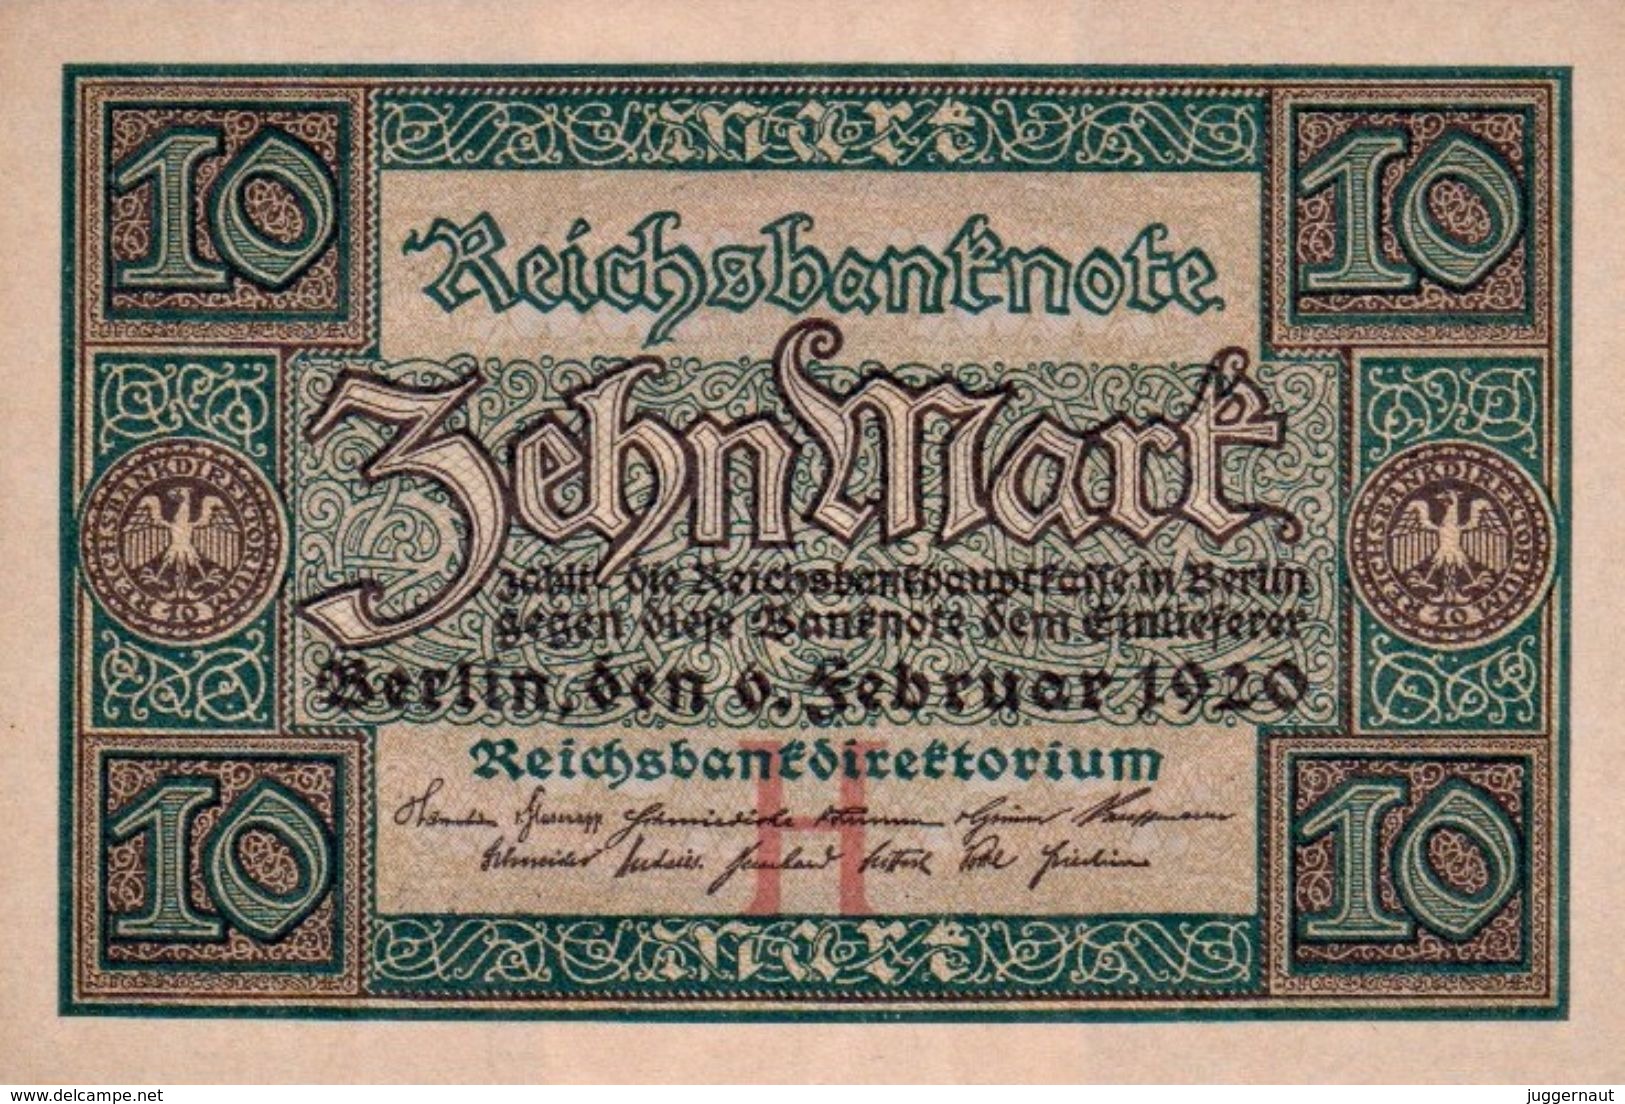 GERMANY 10 MARK REICHSBANKNOTE 1920 AD PICK NO.67 UNCIRCULATED UNC - 10 Mark